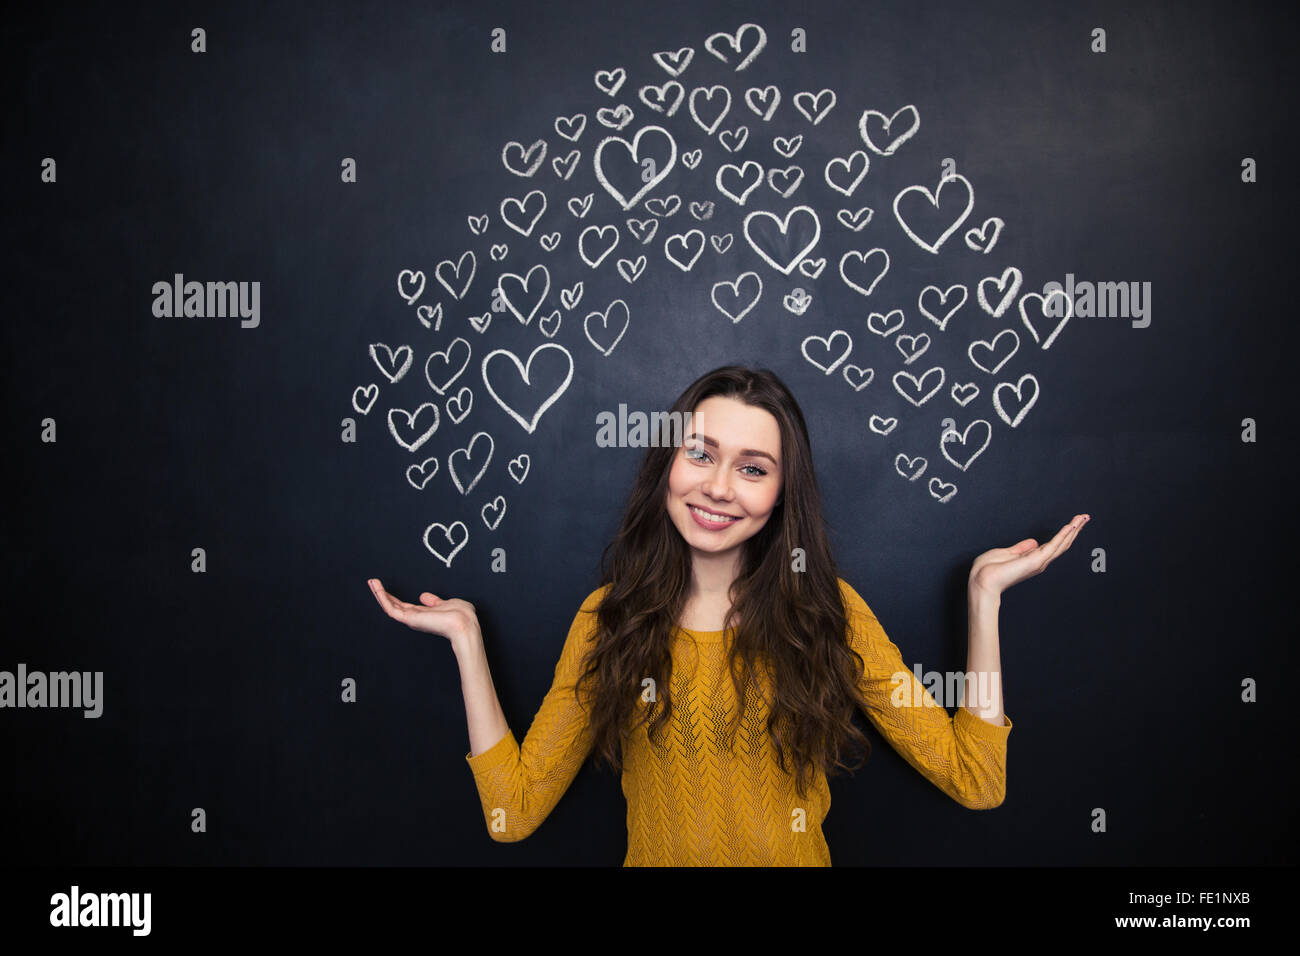 Beautiful smiling young woman holding drawing hearts on both palms over blackboard background Stock Photo